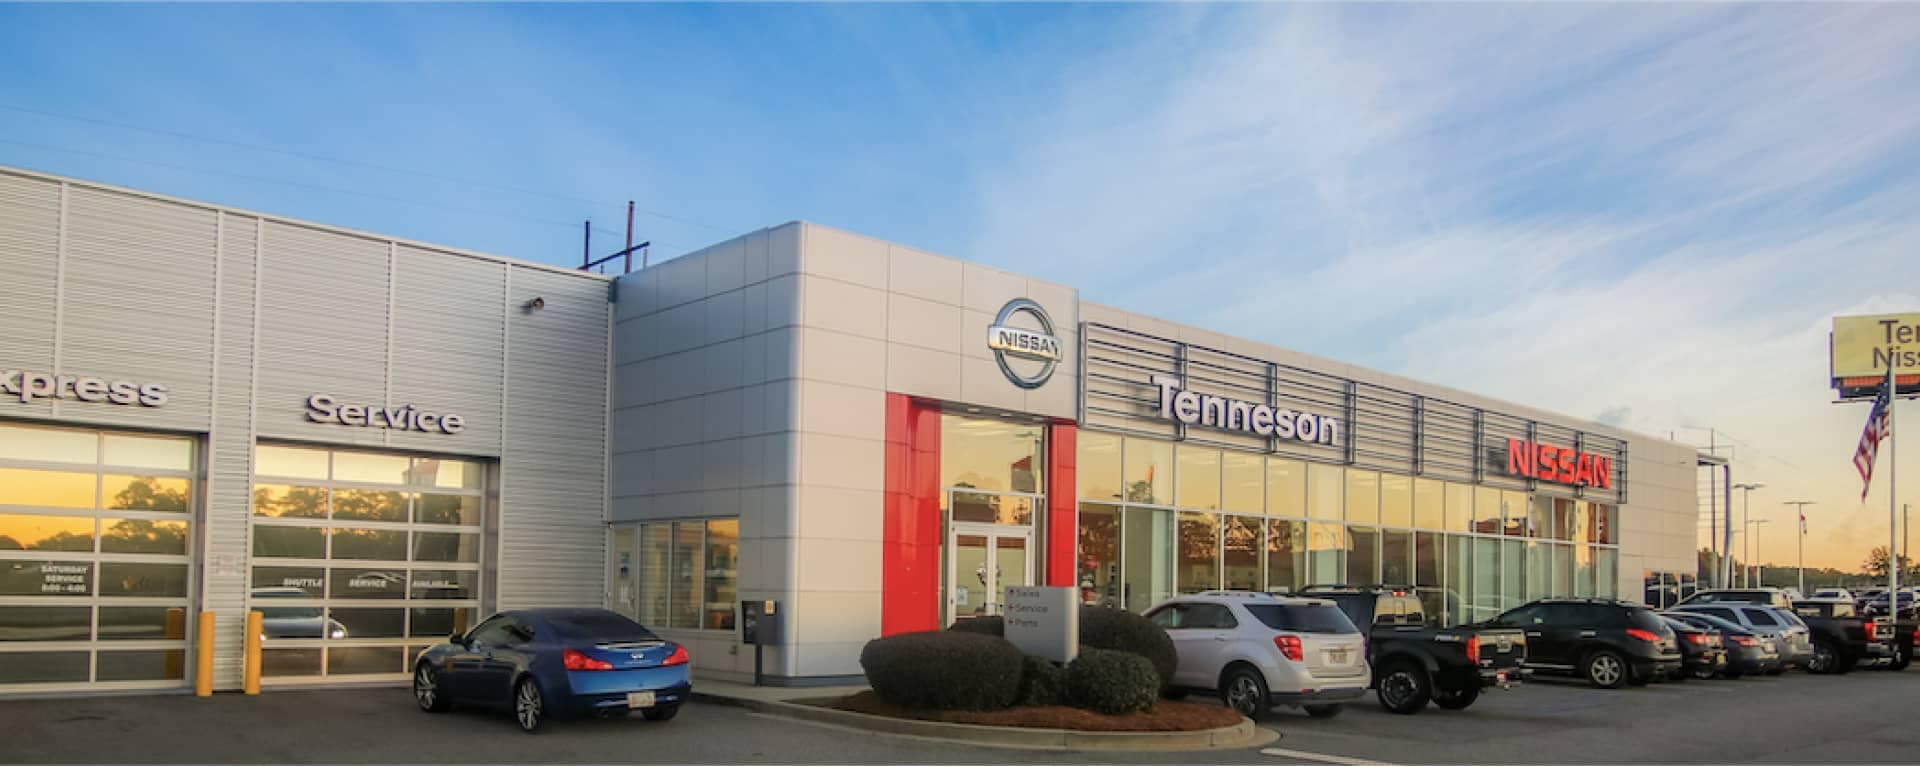 Tenneson Nissan Exterior Shot of the dealership